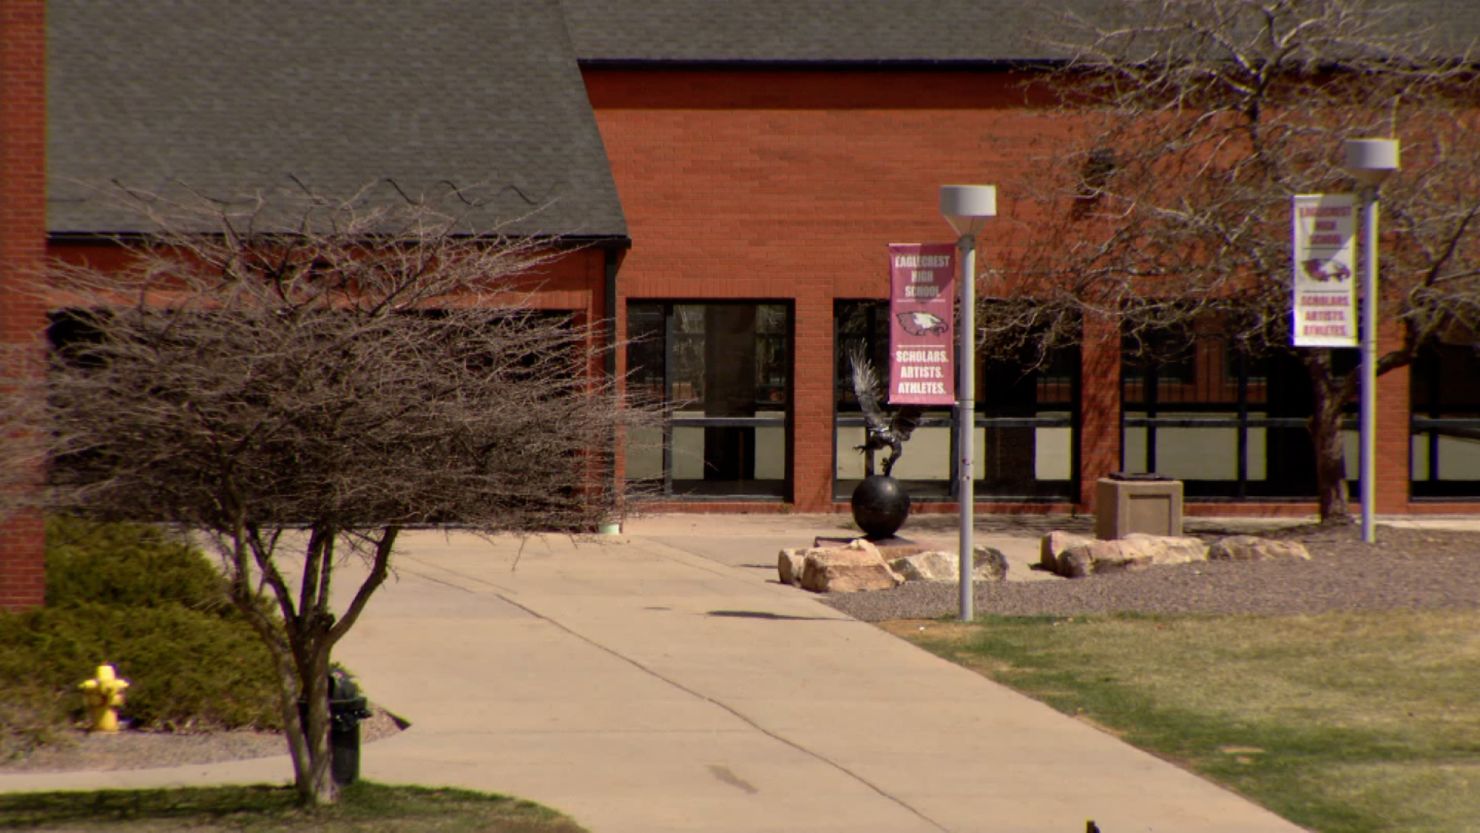 The school district said that mental health support staff will be available for students.